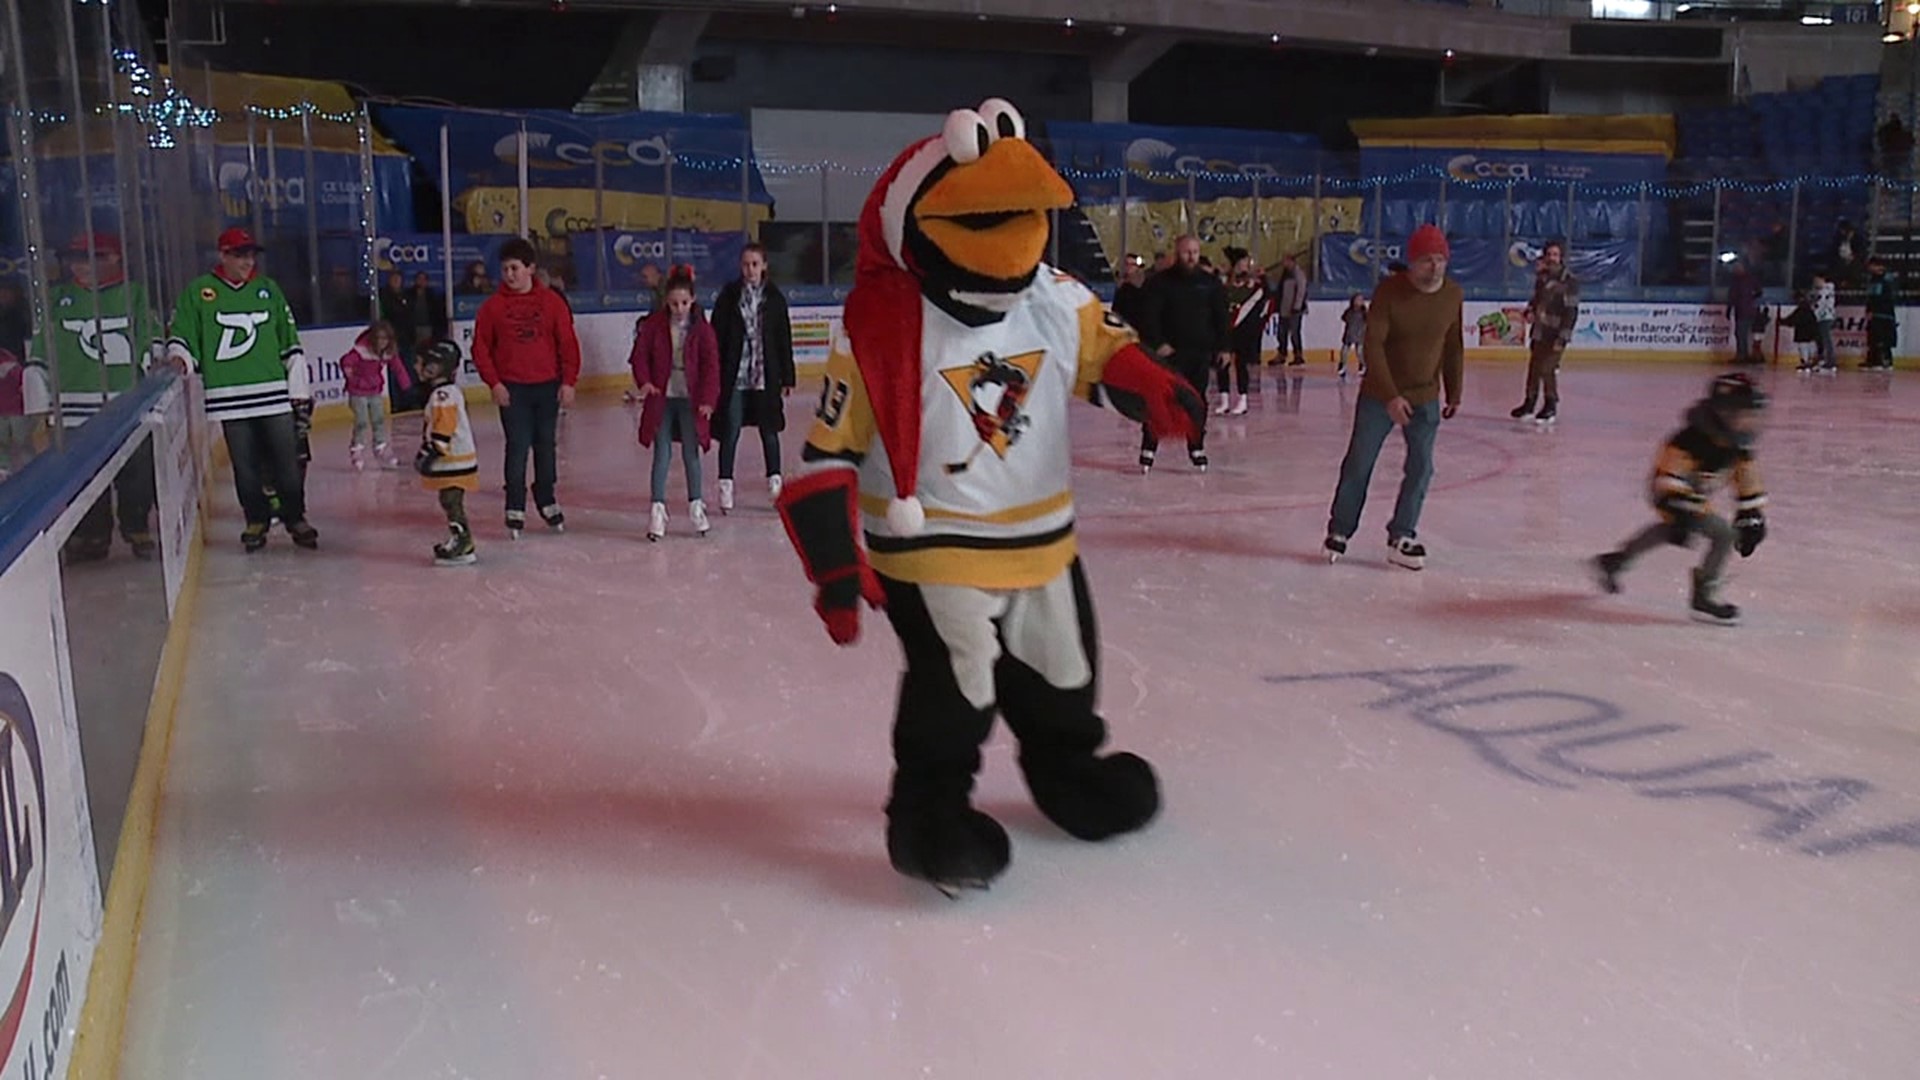 Tuesday night marked the one night a year that the general public got to skate at Mohegan Sun Arena at Casey Plaza, where the Wilkes-Barre/Scranton Penguins play.